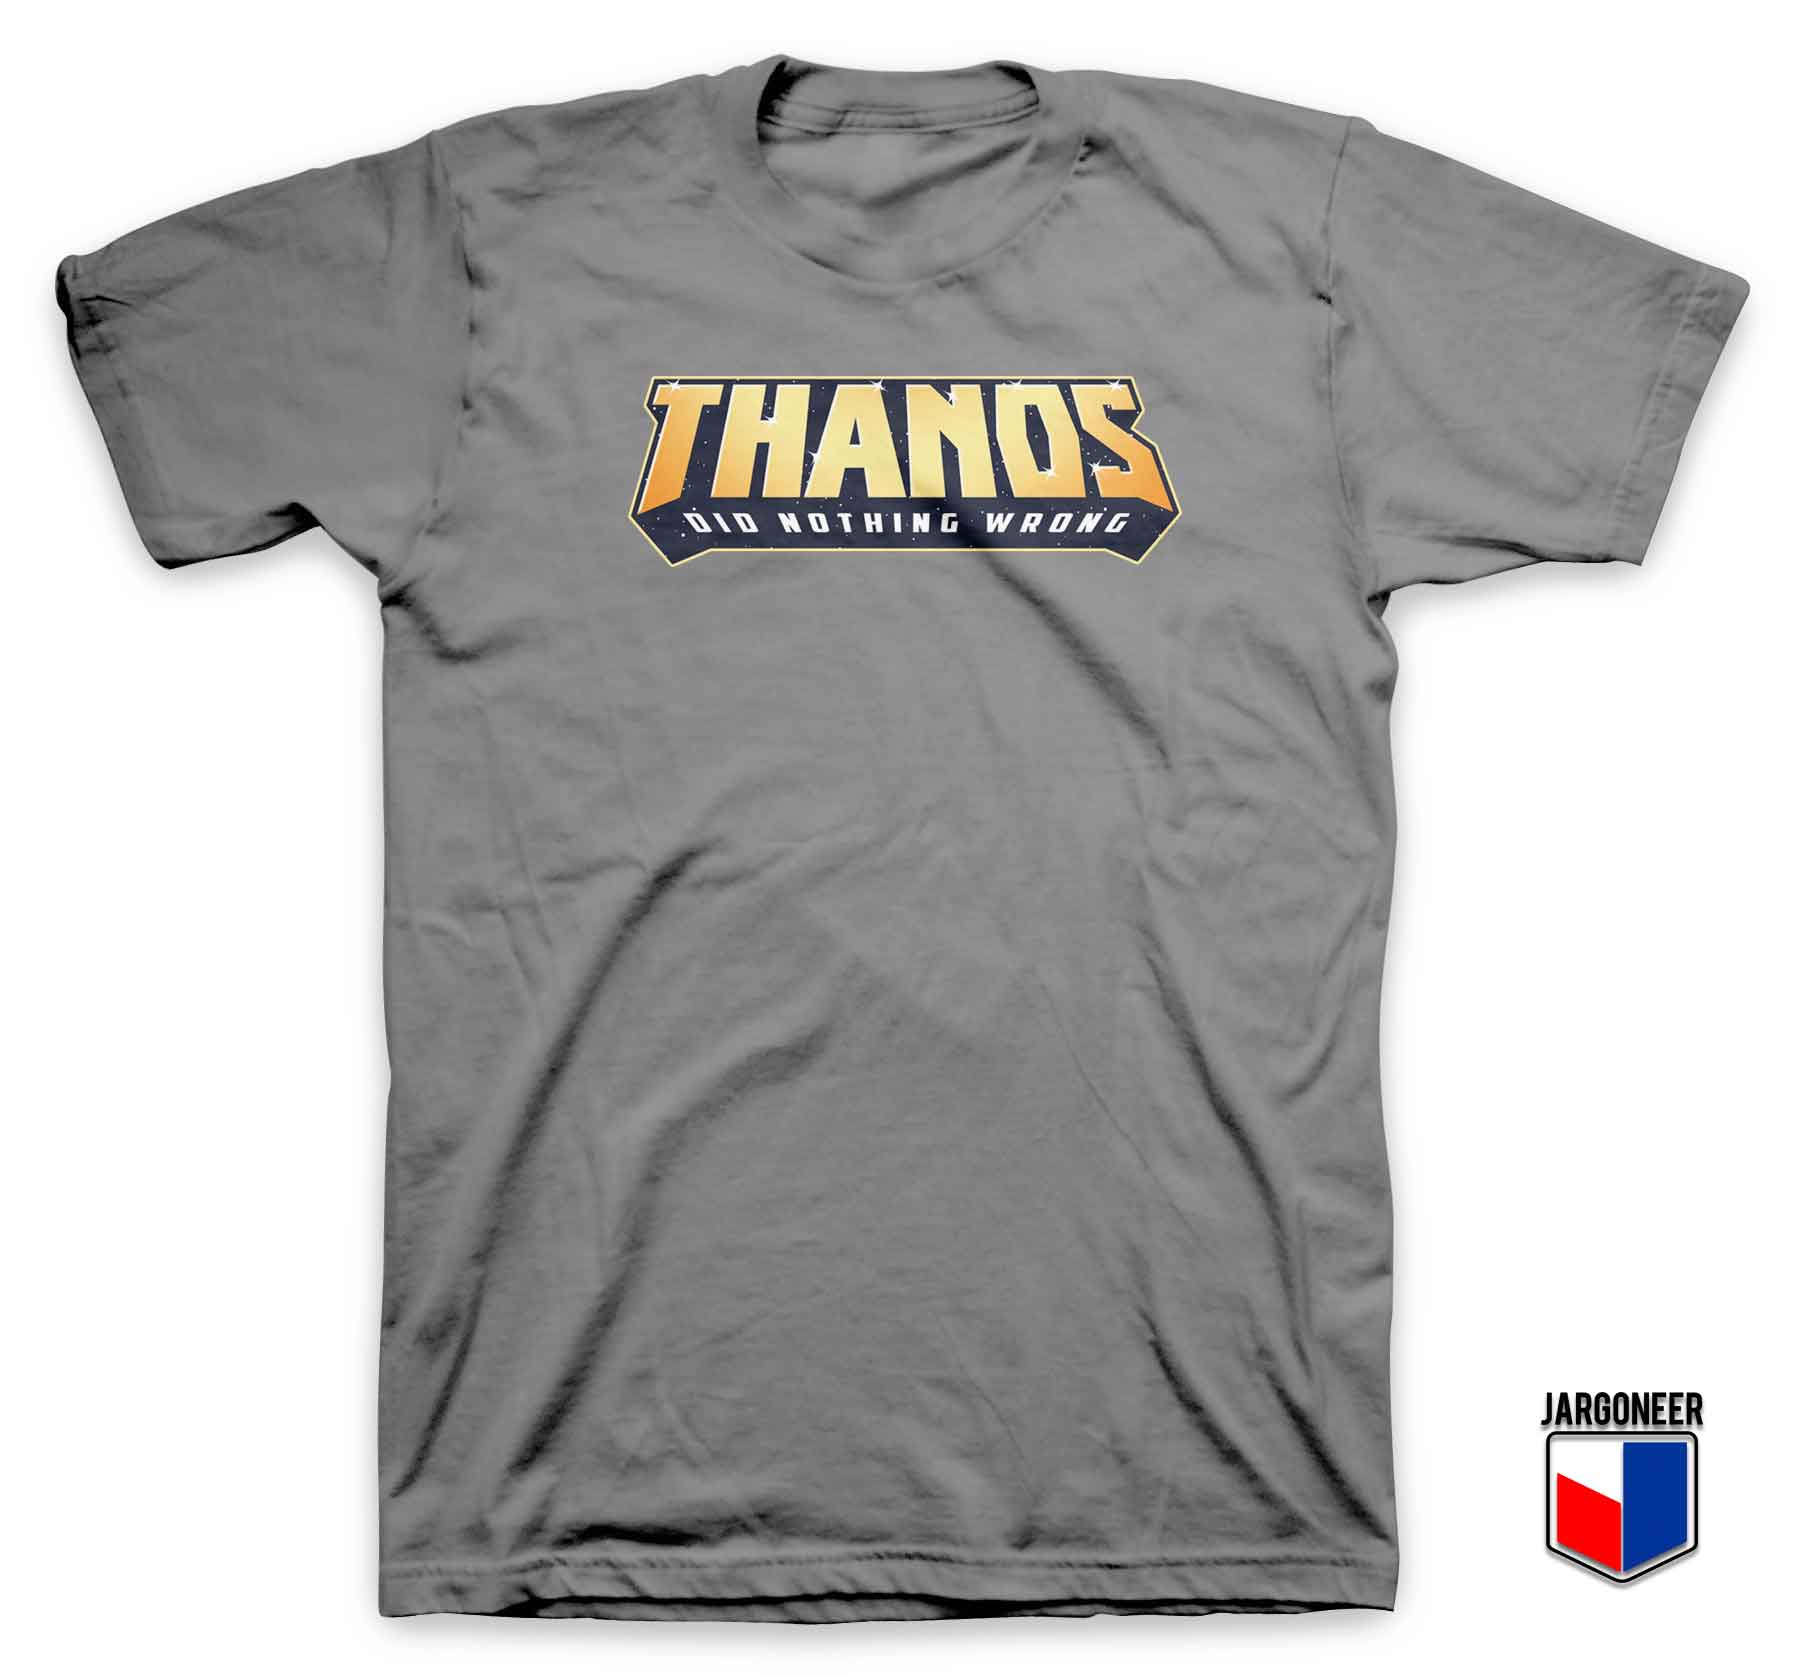 Thanos Did Nothing Wrong - Shop Unique Graphic Cool Shirt Designs